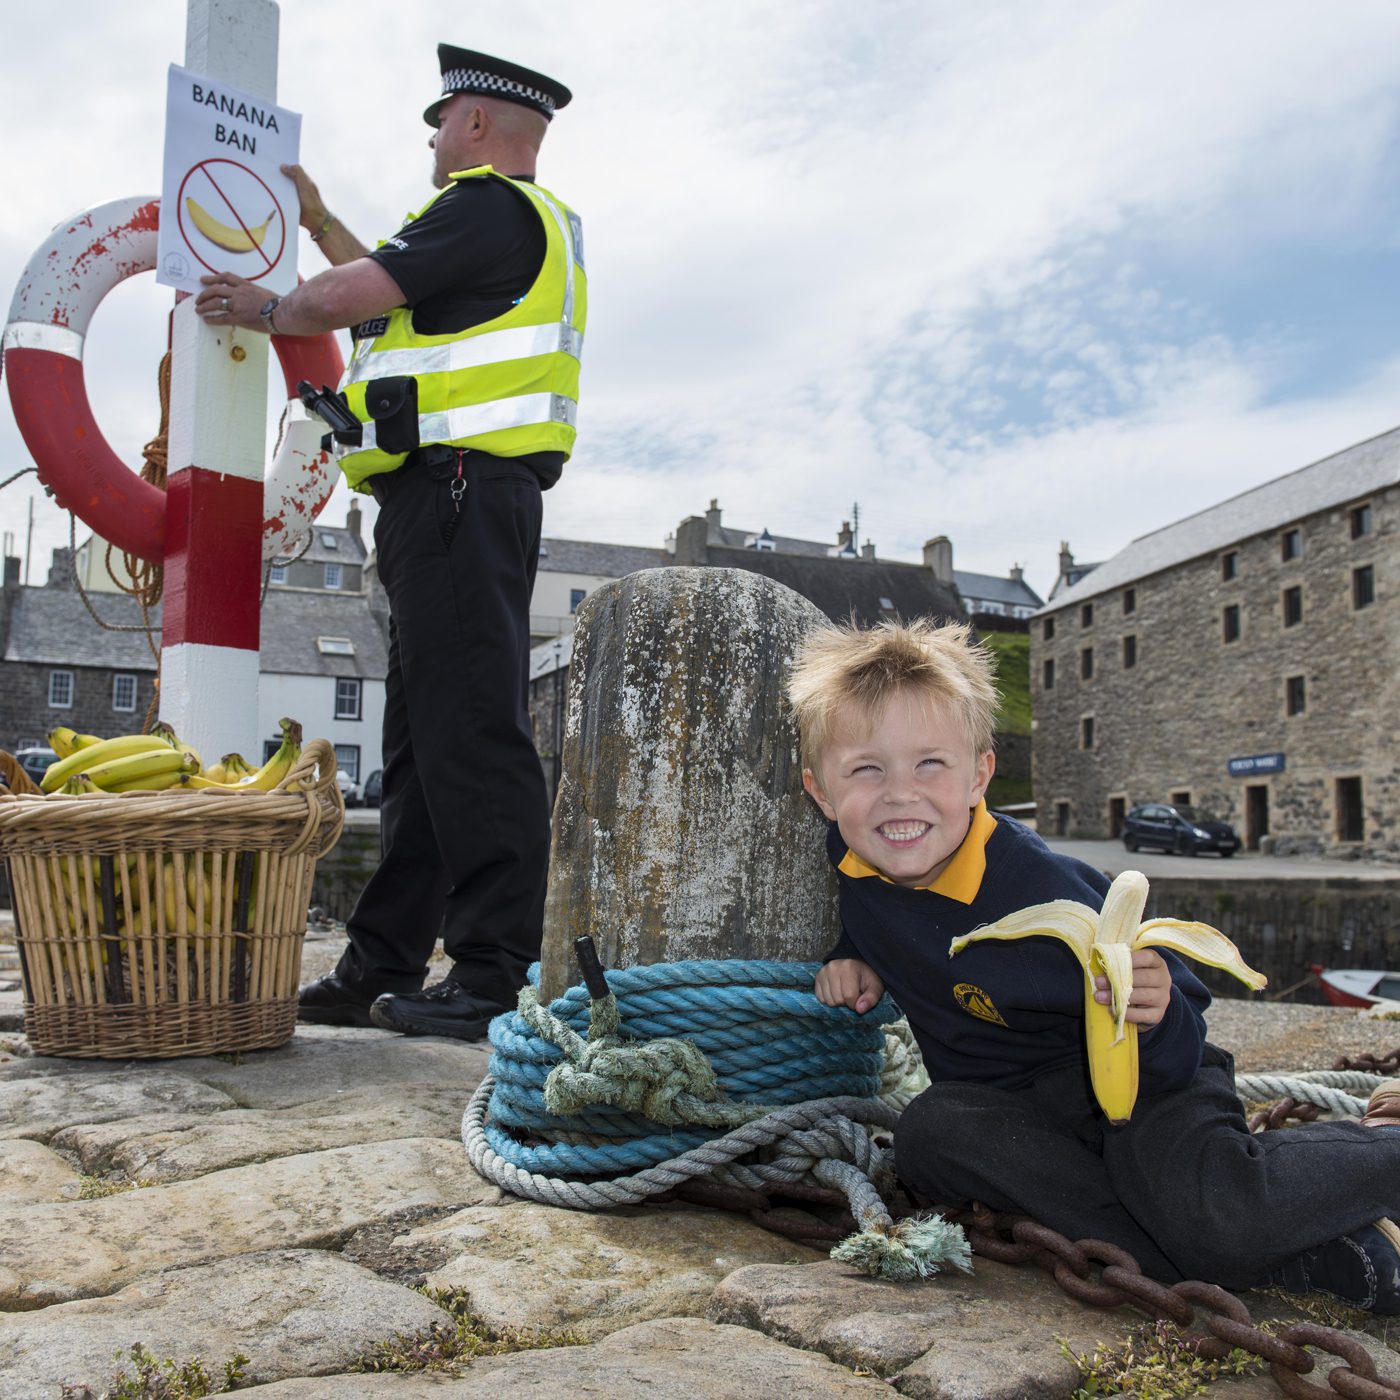 Bananas banned from Scottish Traditional Boat Festival | Scotsman Food ...